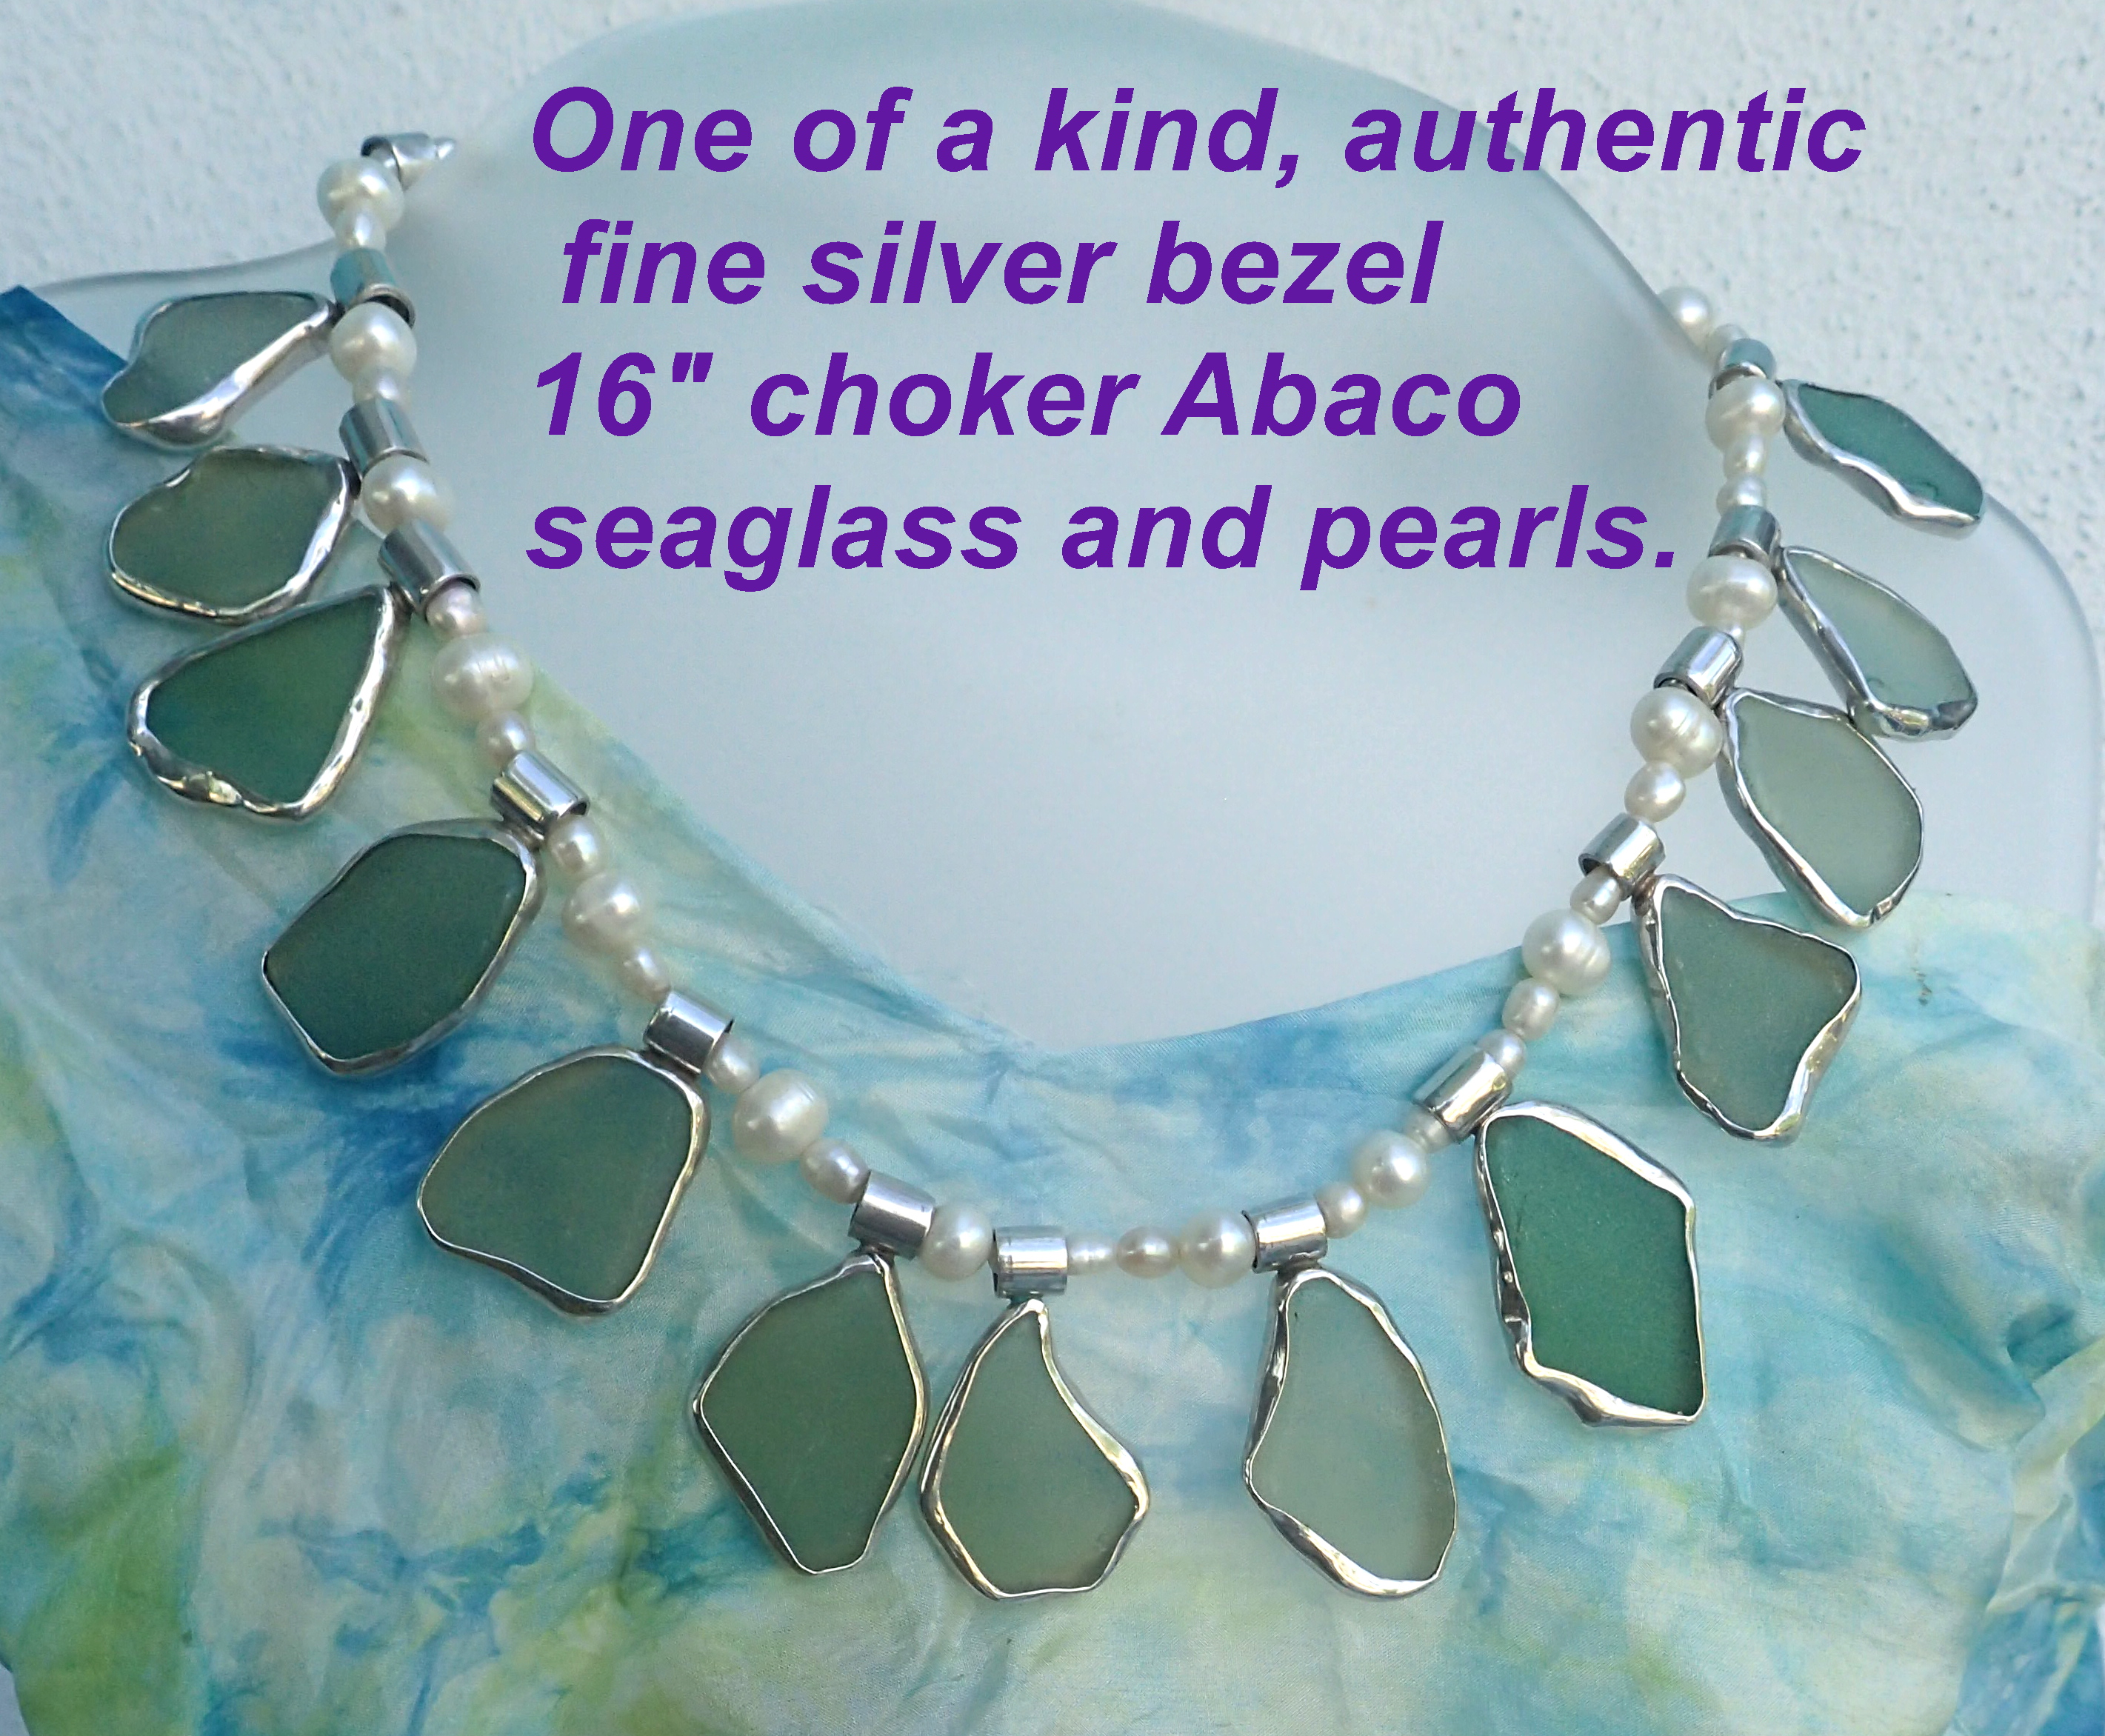 This is the last necklace I made before retiring from jewelry making in 2019.  All these pieces of seaglass are authentic Abaco seaglass collected over the past 25 years.  This is a collectible piece 